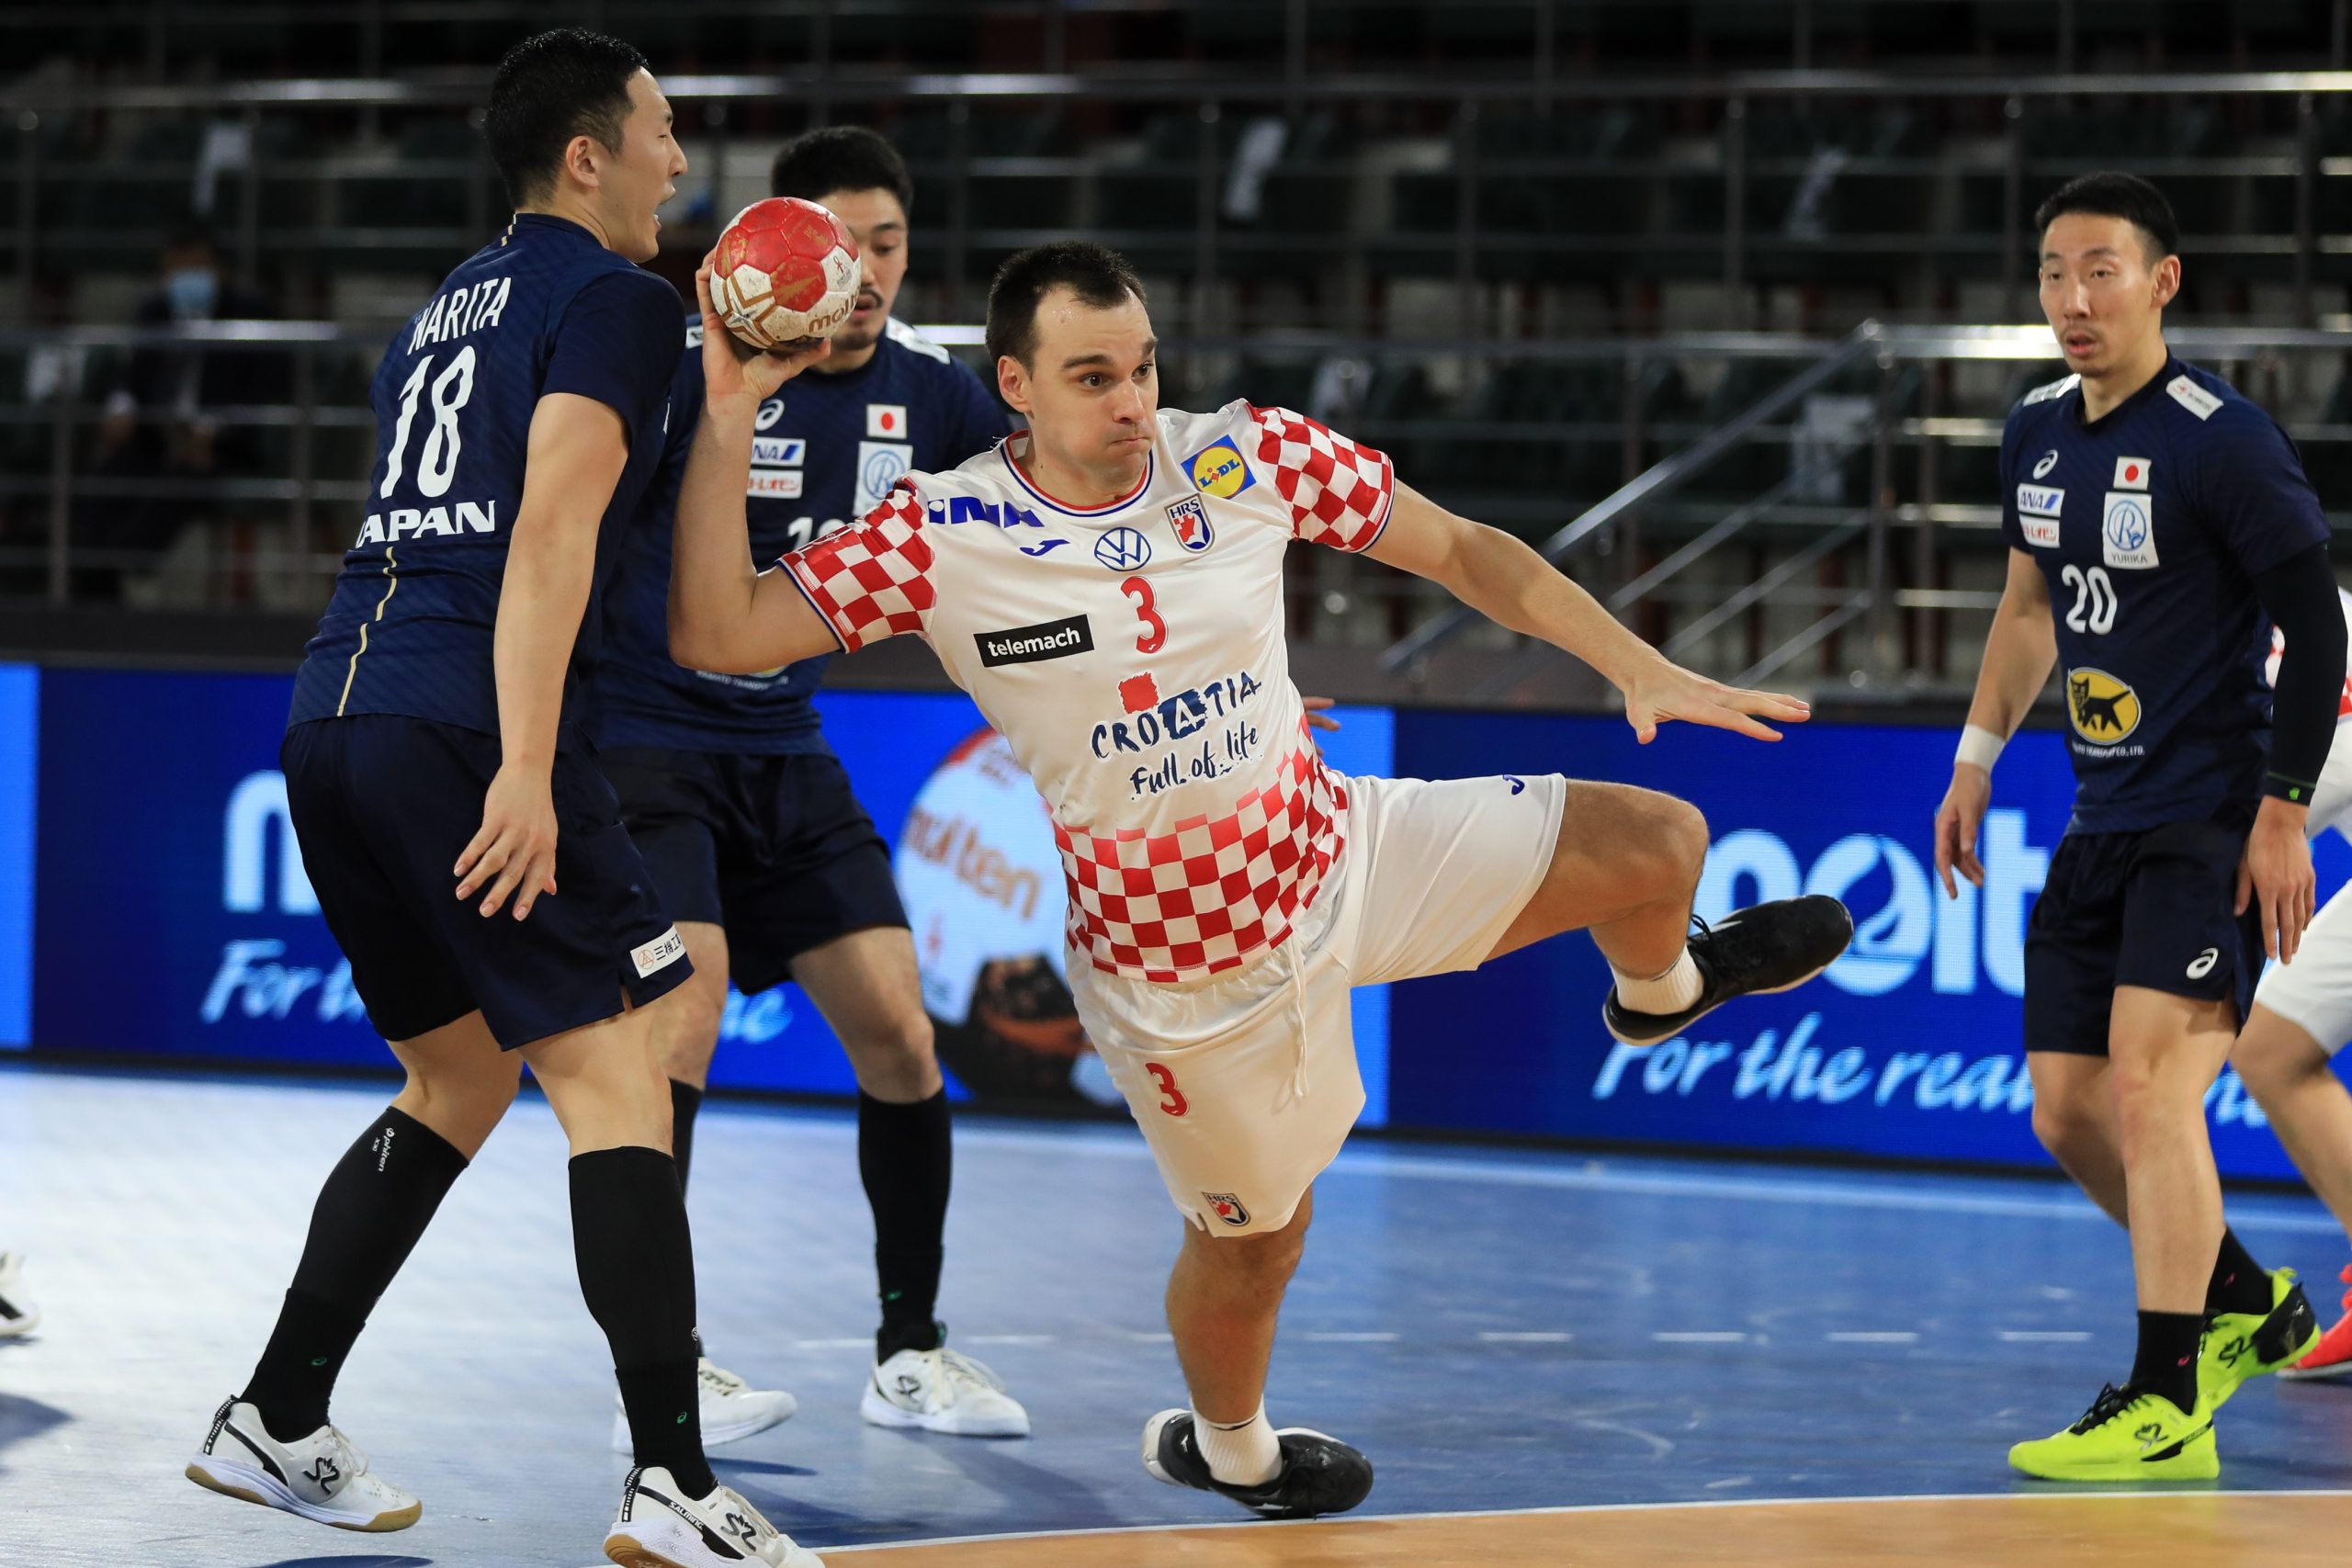 epa08939896 A handout photo made available by Egypt Handball 2021 of Mario Maric (C) of Croatia in action during the match between Croatia and Japan at the 27th Men's Handball World Championship in Alexandria, Egypt, 15 January 2021.  EPA/Hazem Gouda / Egypt Handball 2021 HANDOUT  SHUTTERSTOCK OUT HANDOUT EDITORIAL USE ONLY/NO SALES